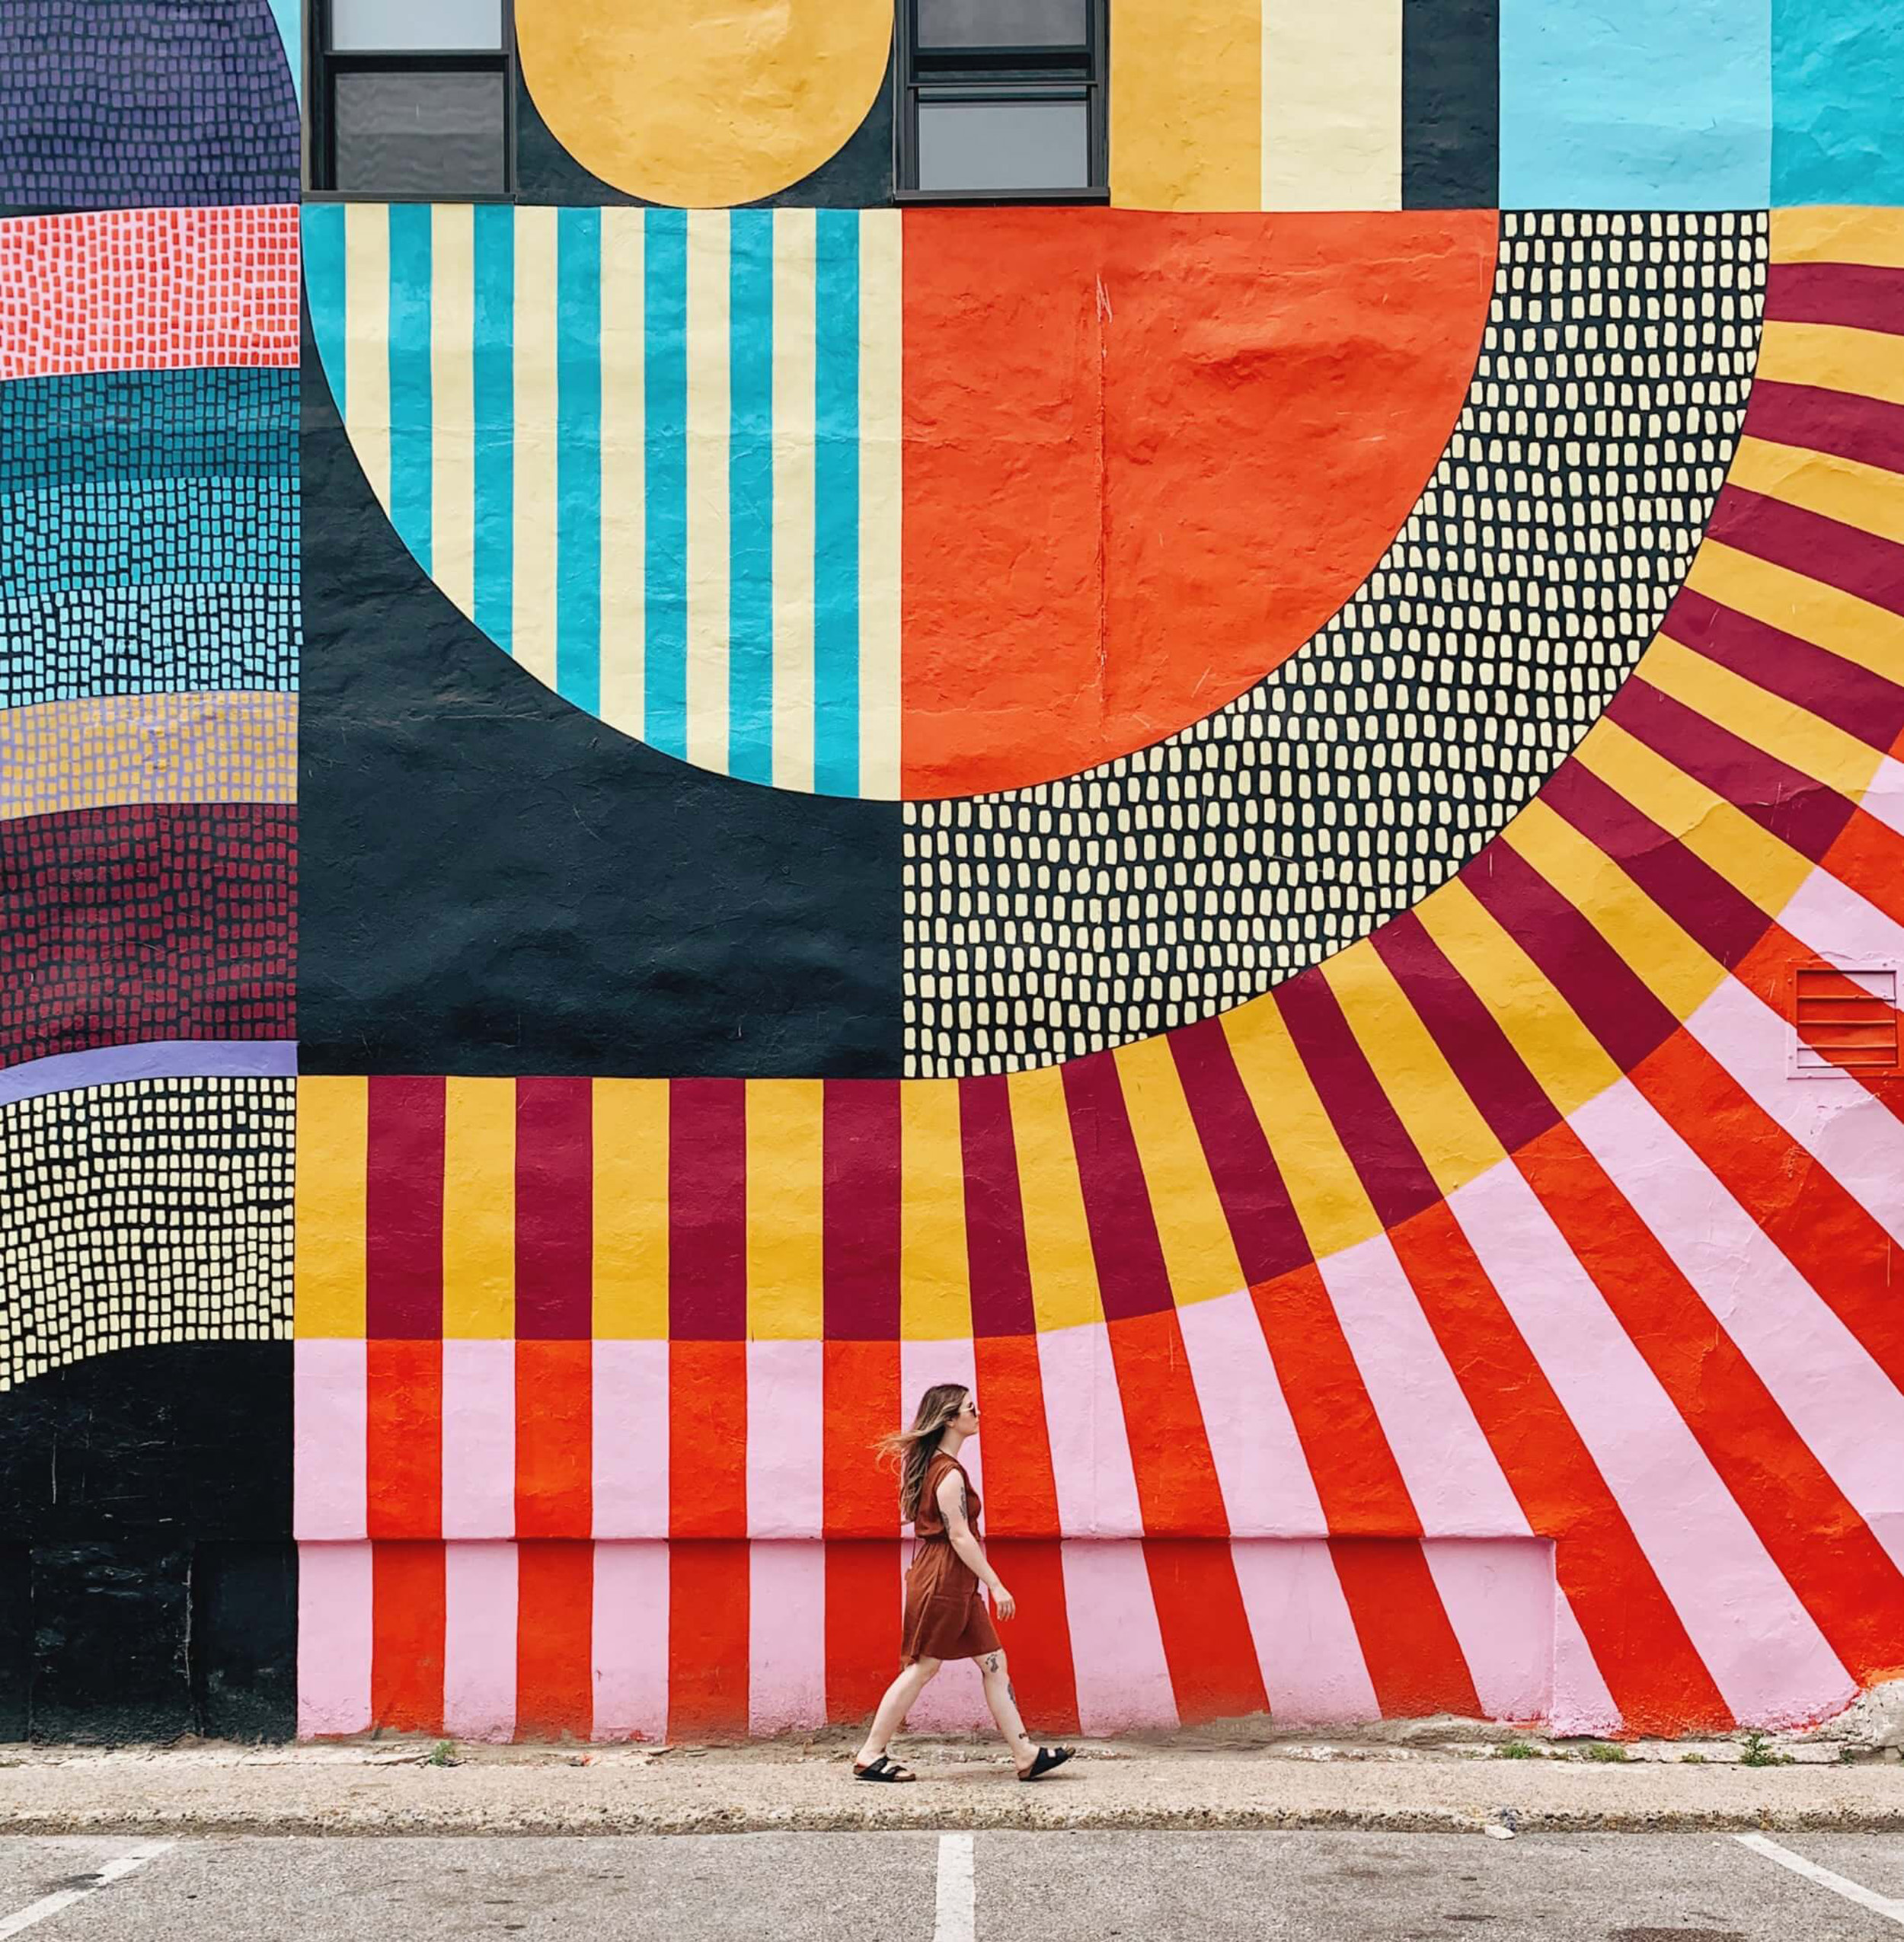 A person passes a colorful mural.